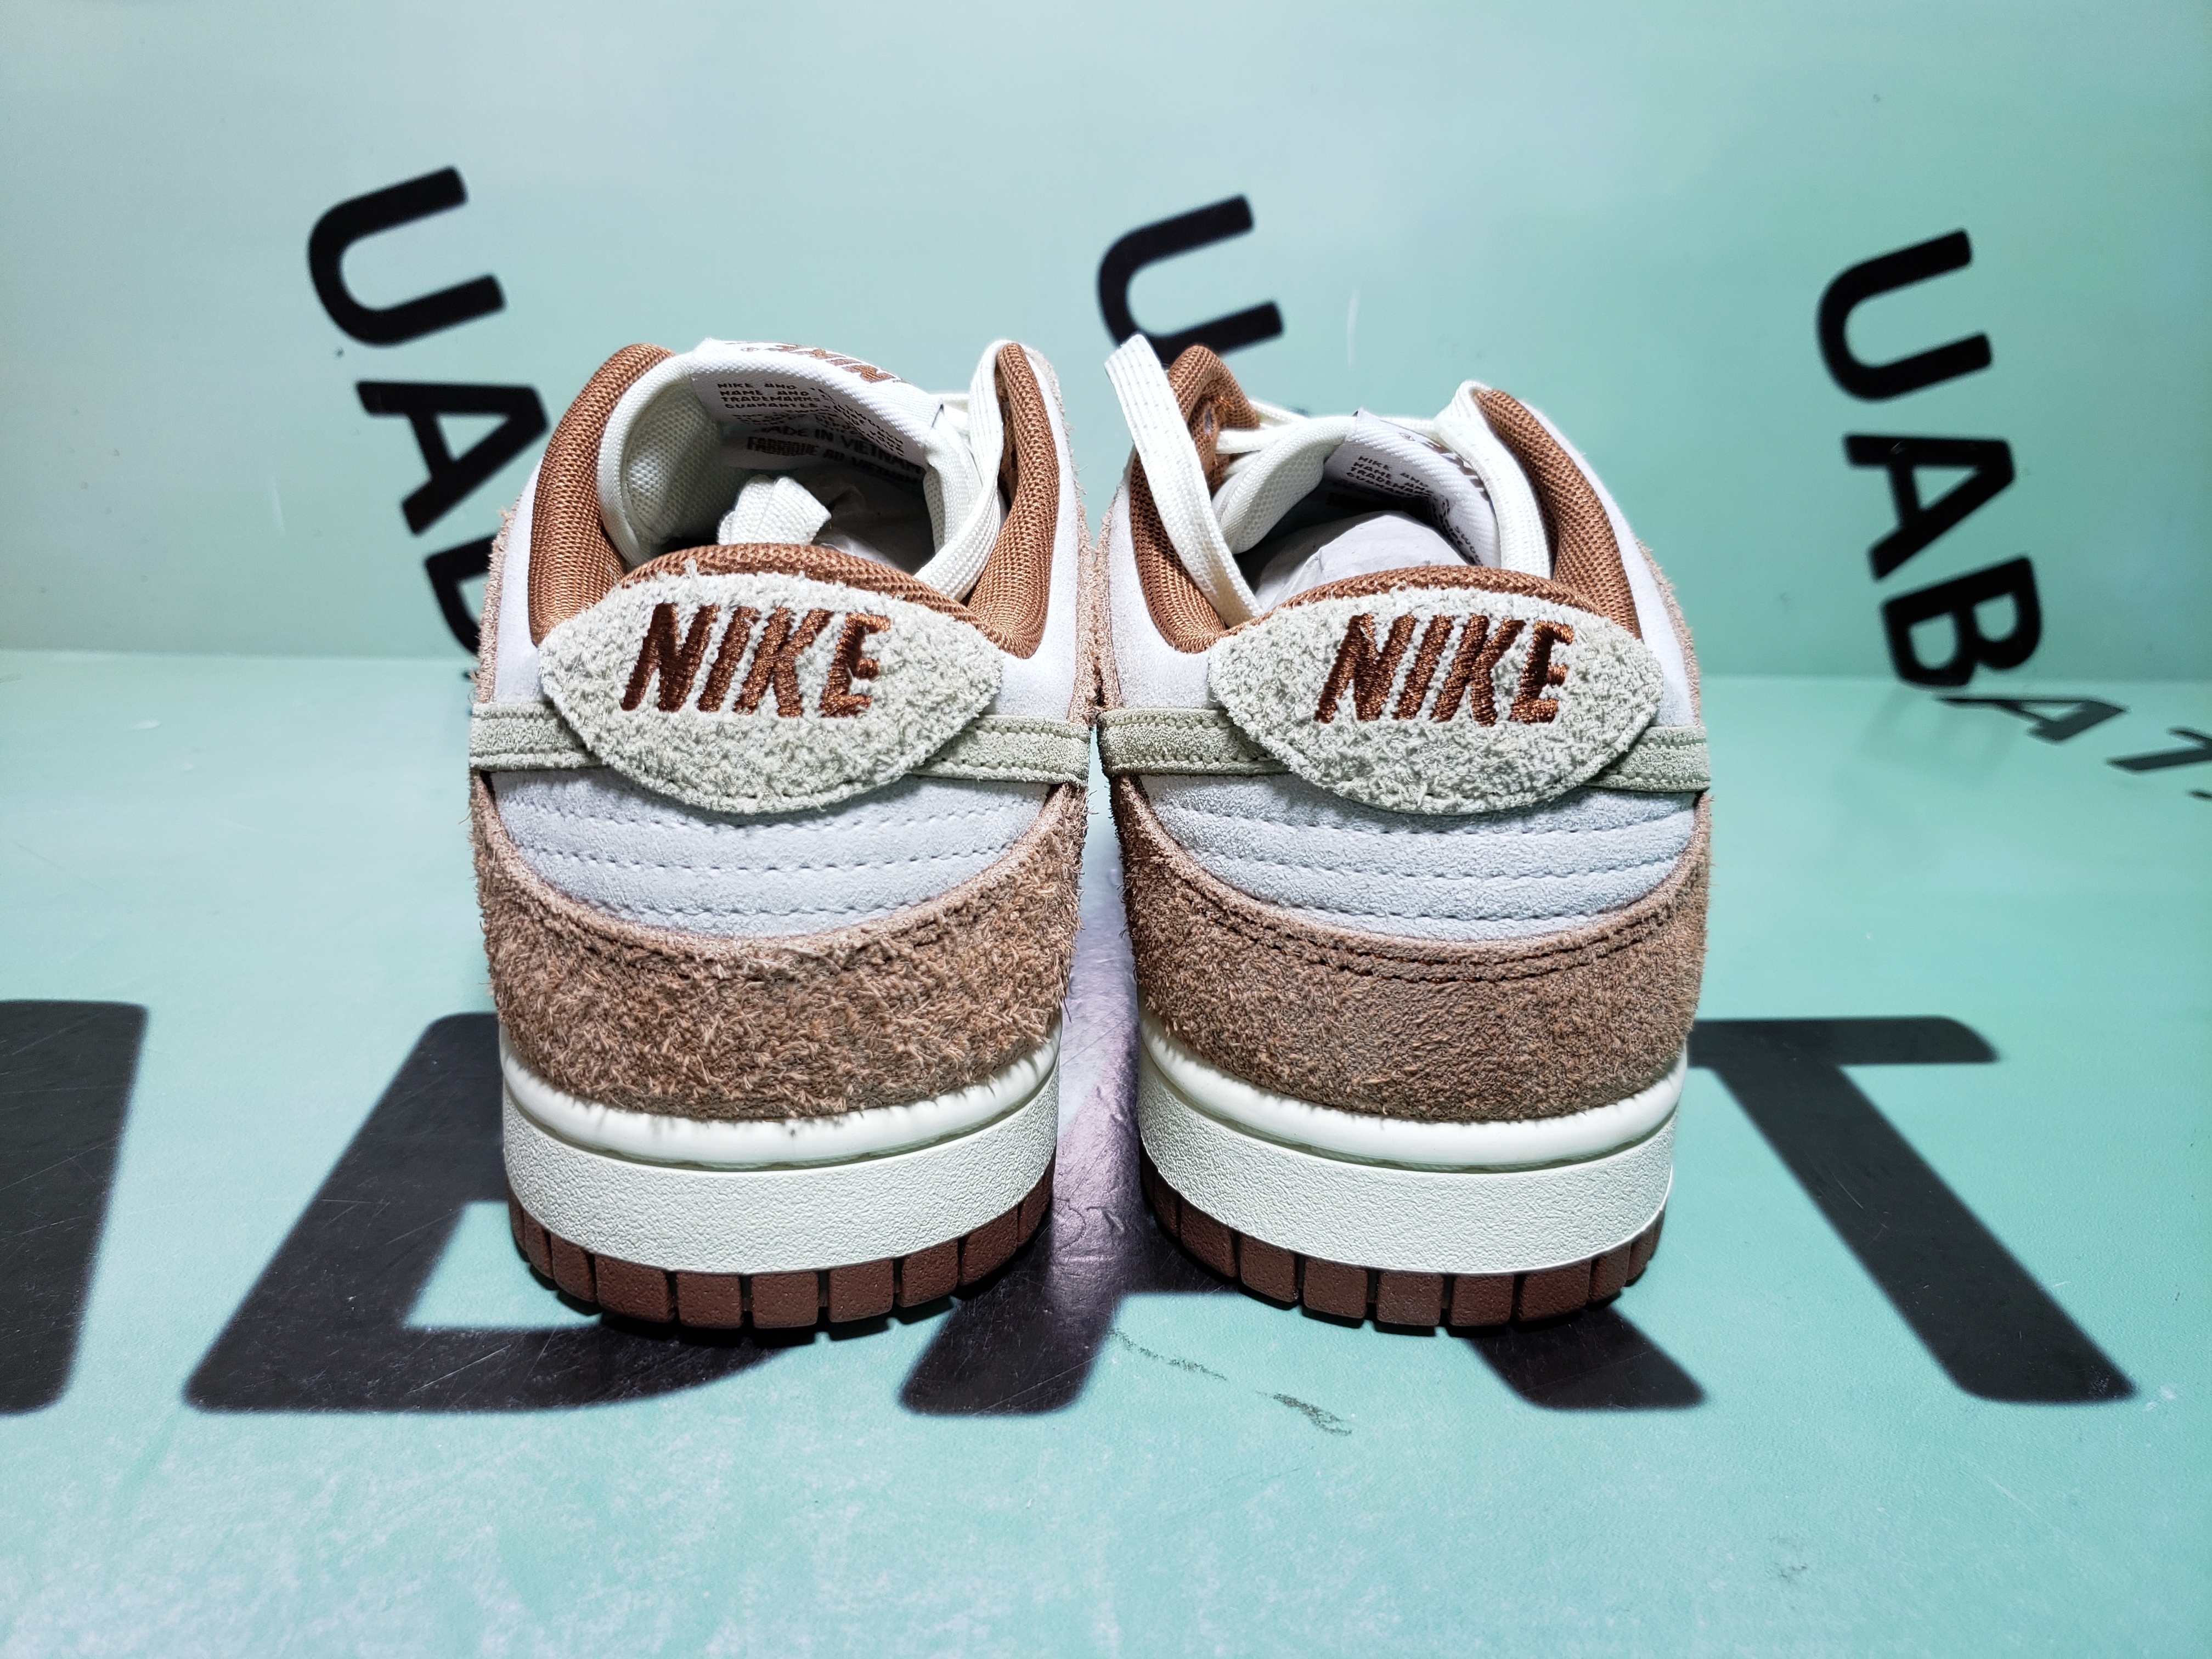 Nike Pay Homage To Berlin's Nightlife With The Nike 'BLN'